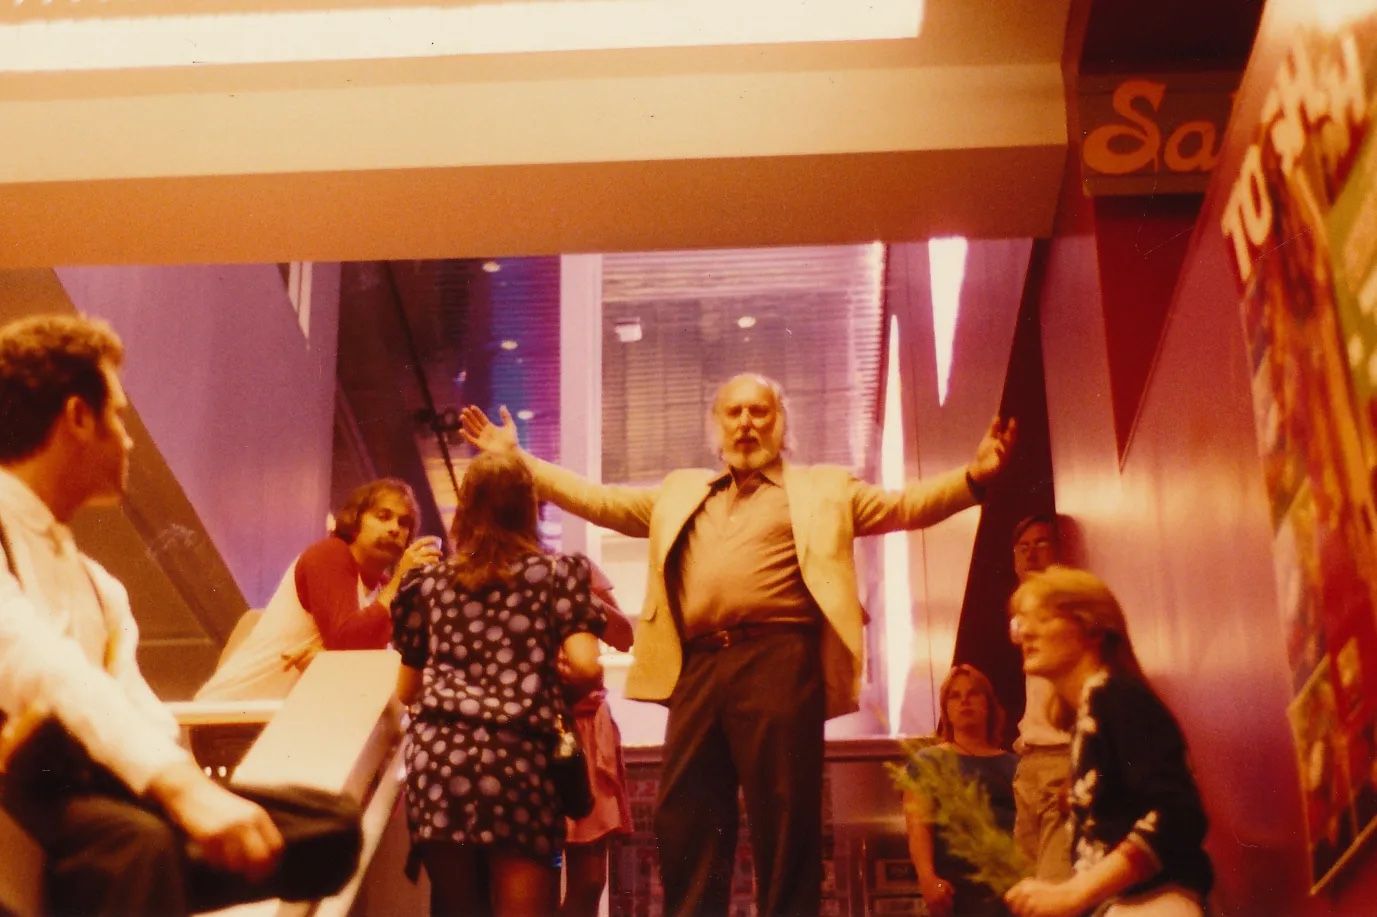 Russ Solomon at the inauguration of Tower Records New York Store in 1983, as seen in "All Things Must Pass". / Photo courtesy of Gravitas Ventures.